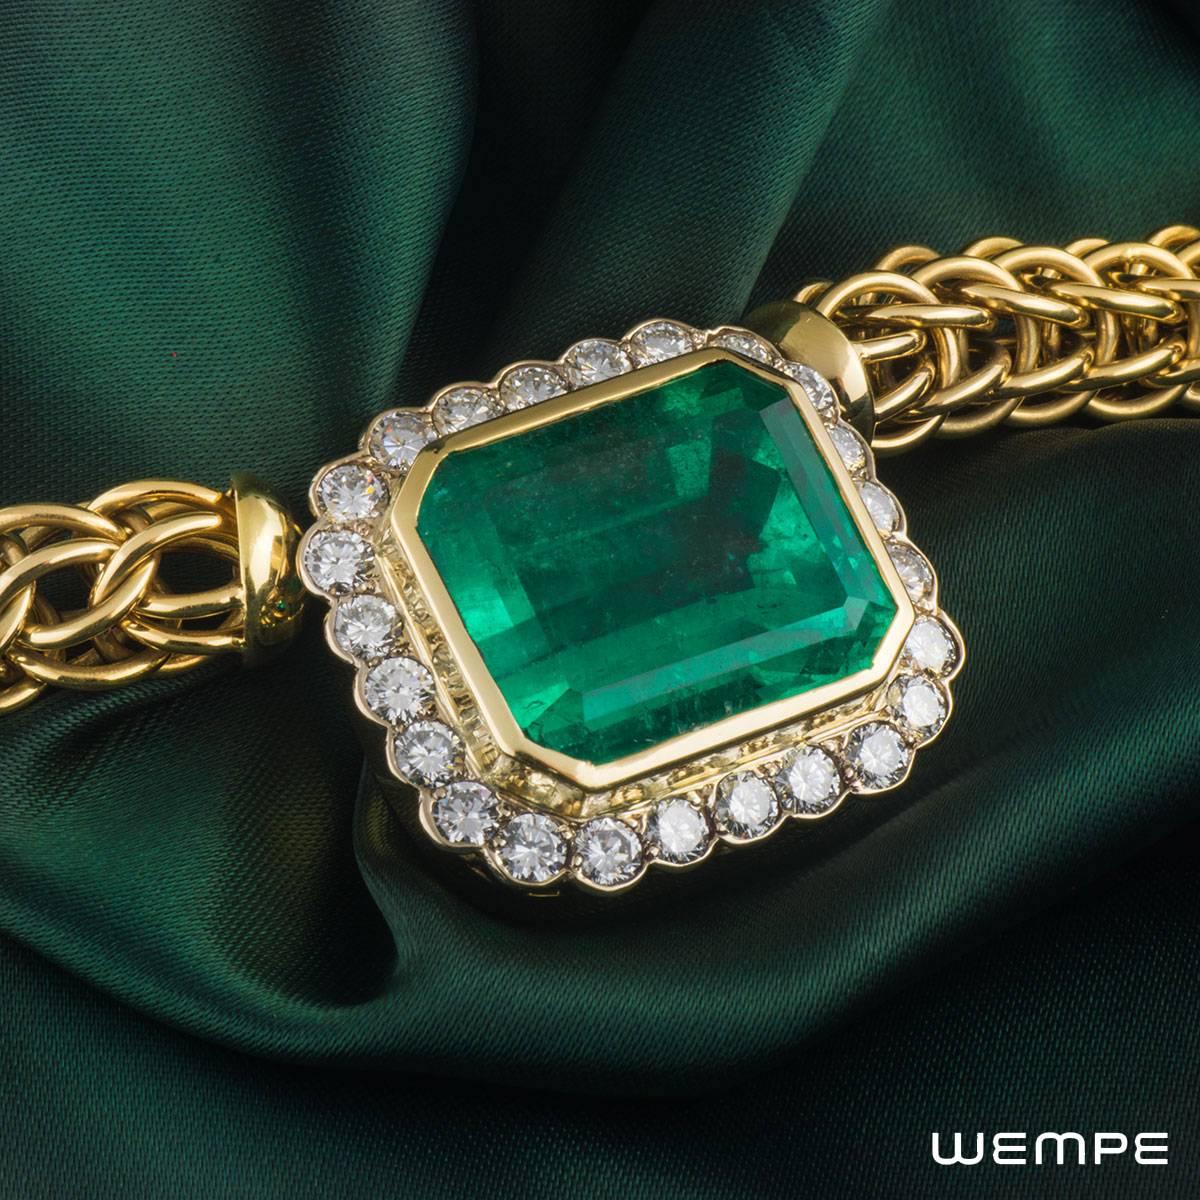 An exquisite 18k yellow gold emerald and diamond necklace by Wempe. The necklace is set to the front with a natural Columbian emerald weighing approximately 40.00ct, displaying a rich even colour and has a diamond surround. The 24 round brilliant